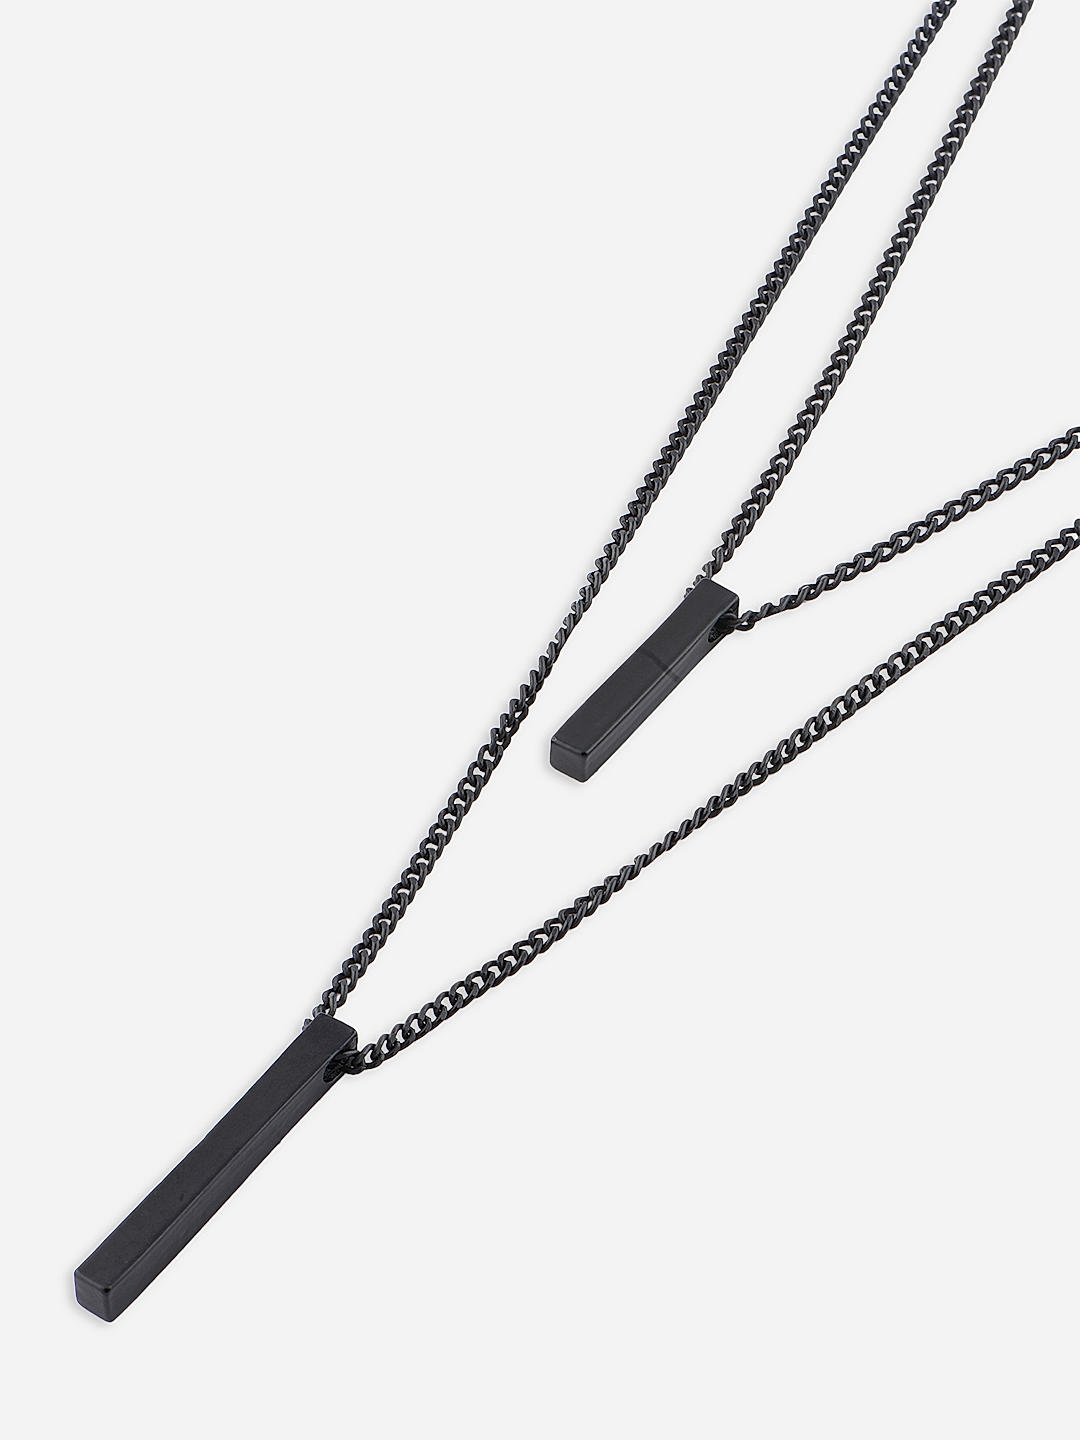 Shopping Dust Rectangle and Spiral 3D Bar Pendant Hip Hop Simple Chain  Trusted Bar Necklace Black Silver Stainless Steel Pendant Price in India -  Buy Shopping Dust Rectangle and Spiral 3D Bar